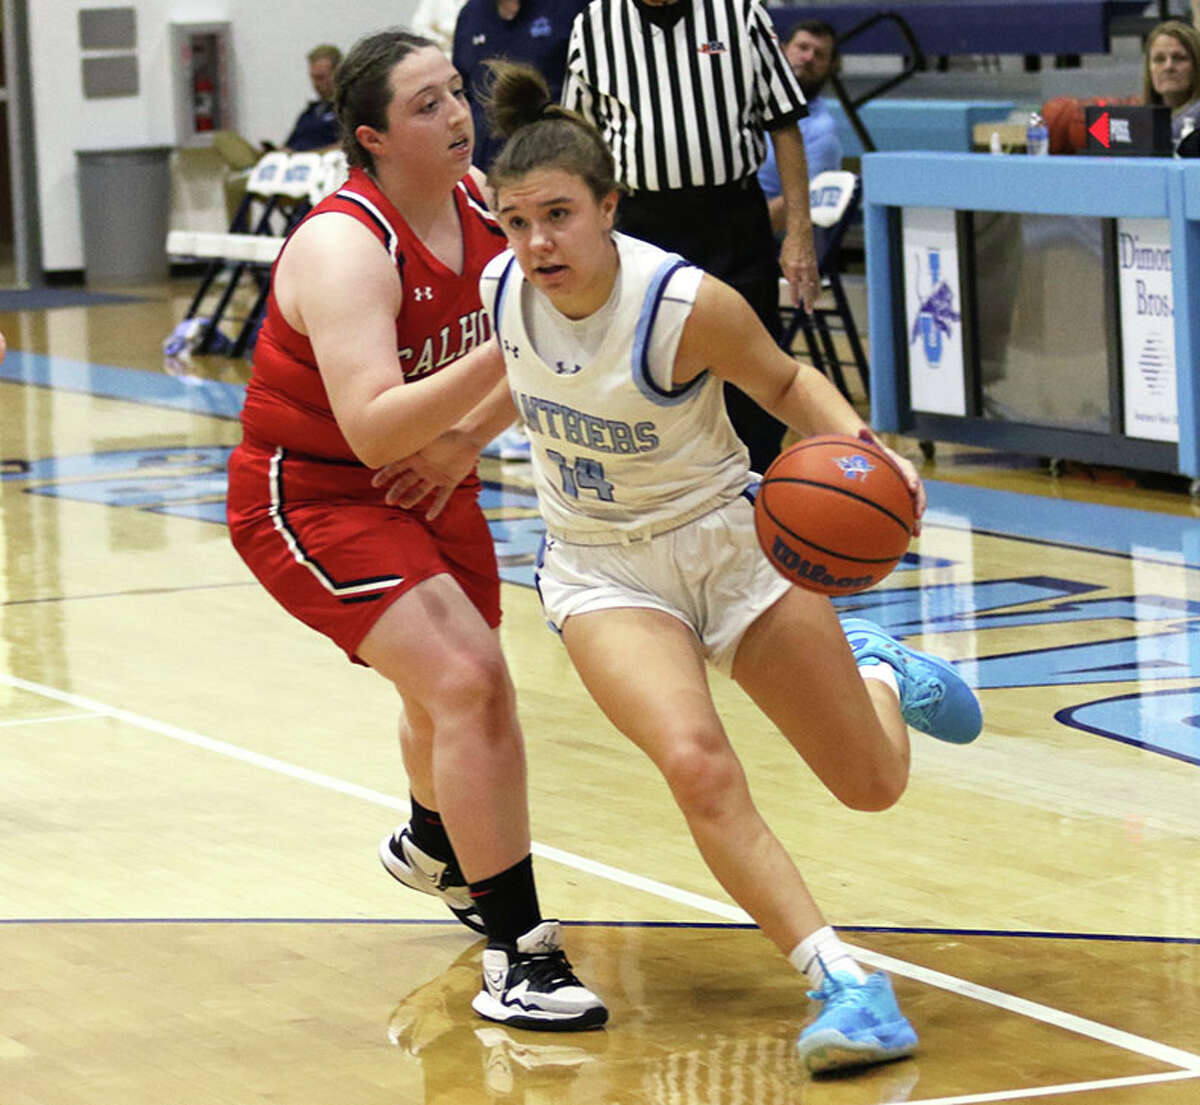 Jersey's Cate Breden (right) drives past Calhoun's Anna Oswald in a game earlier this month in Jerseyville. On Tuesday, the Panthers opened play at the Orchard Farm Tournament in Missouri with a victory.